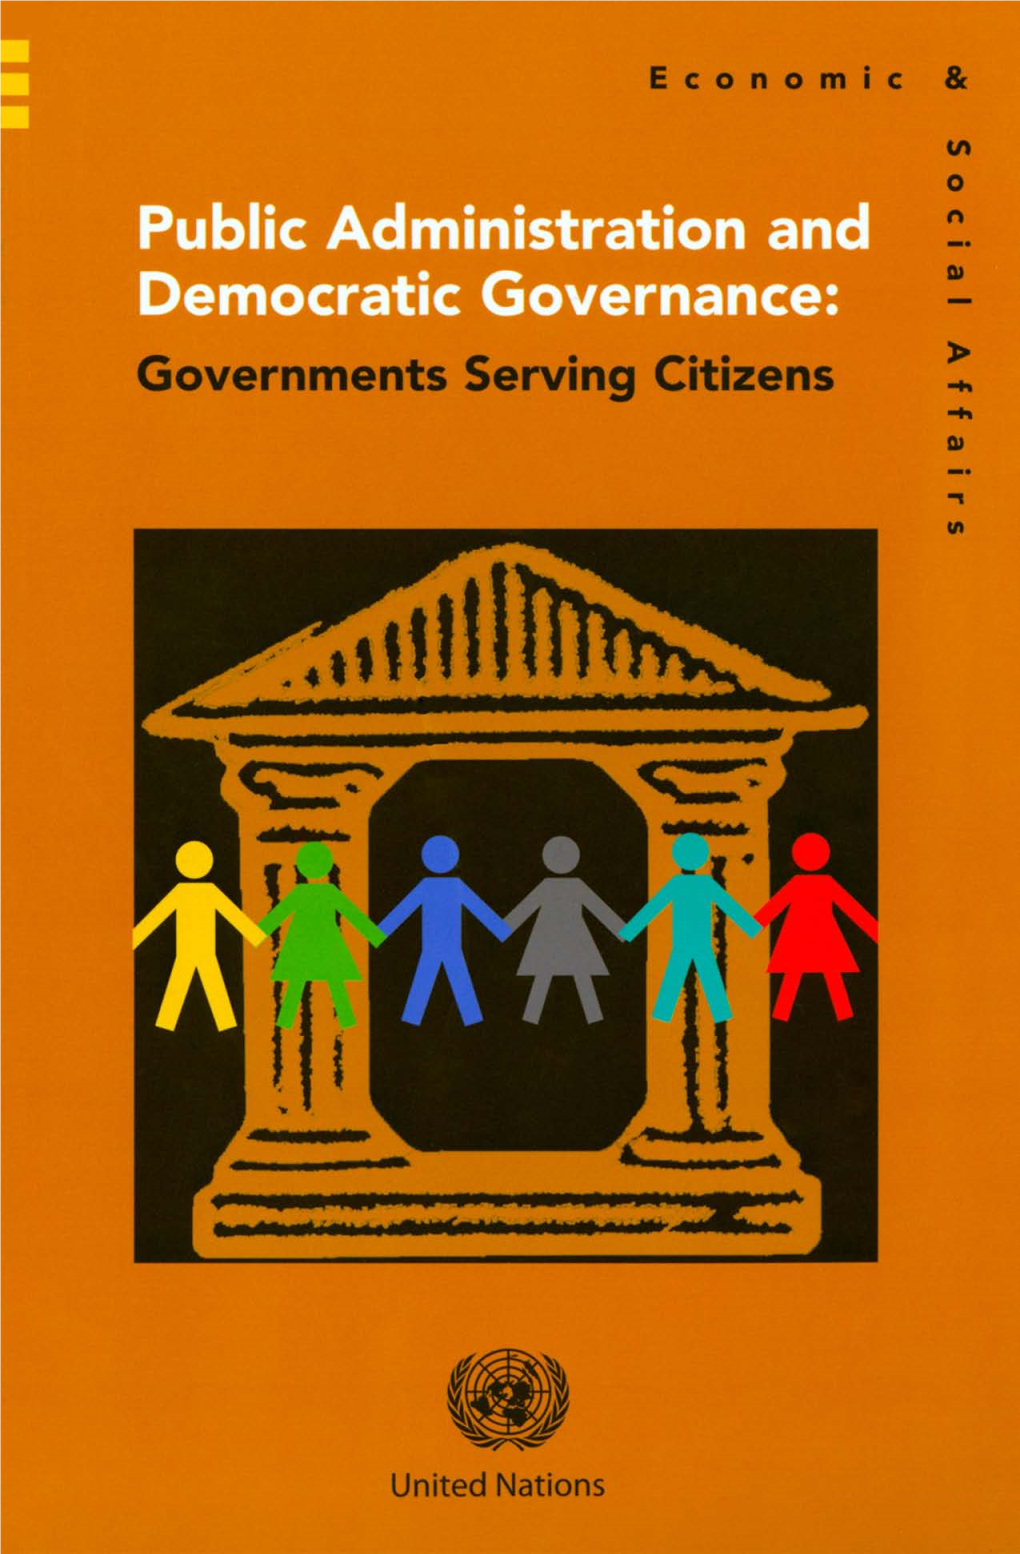 PUBLIC ADMINISTRATION and DEMOCRATIC GOVERNANCE: Governments Serving Citizens